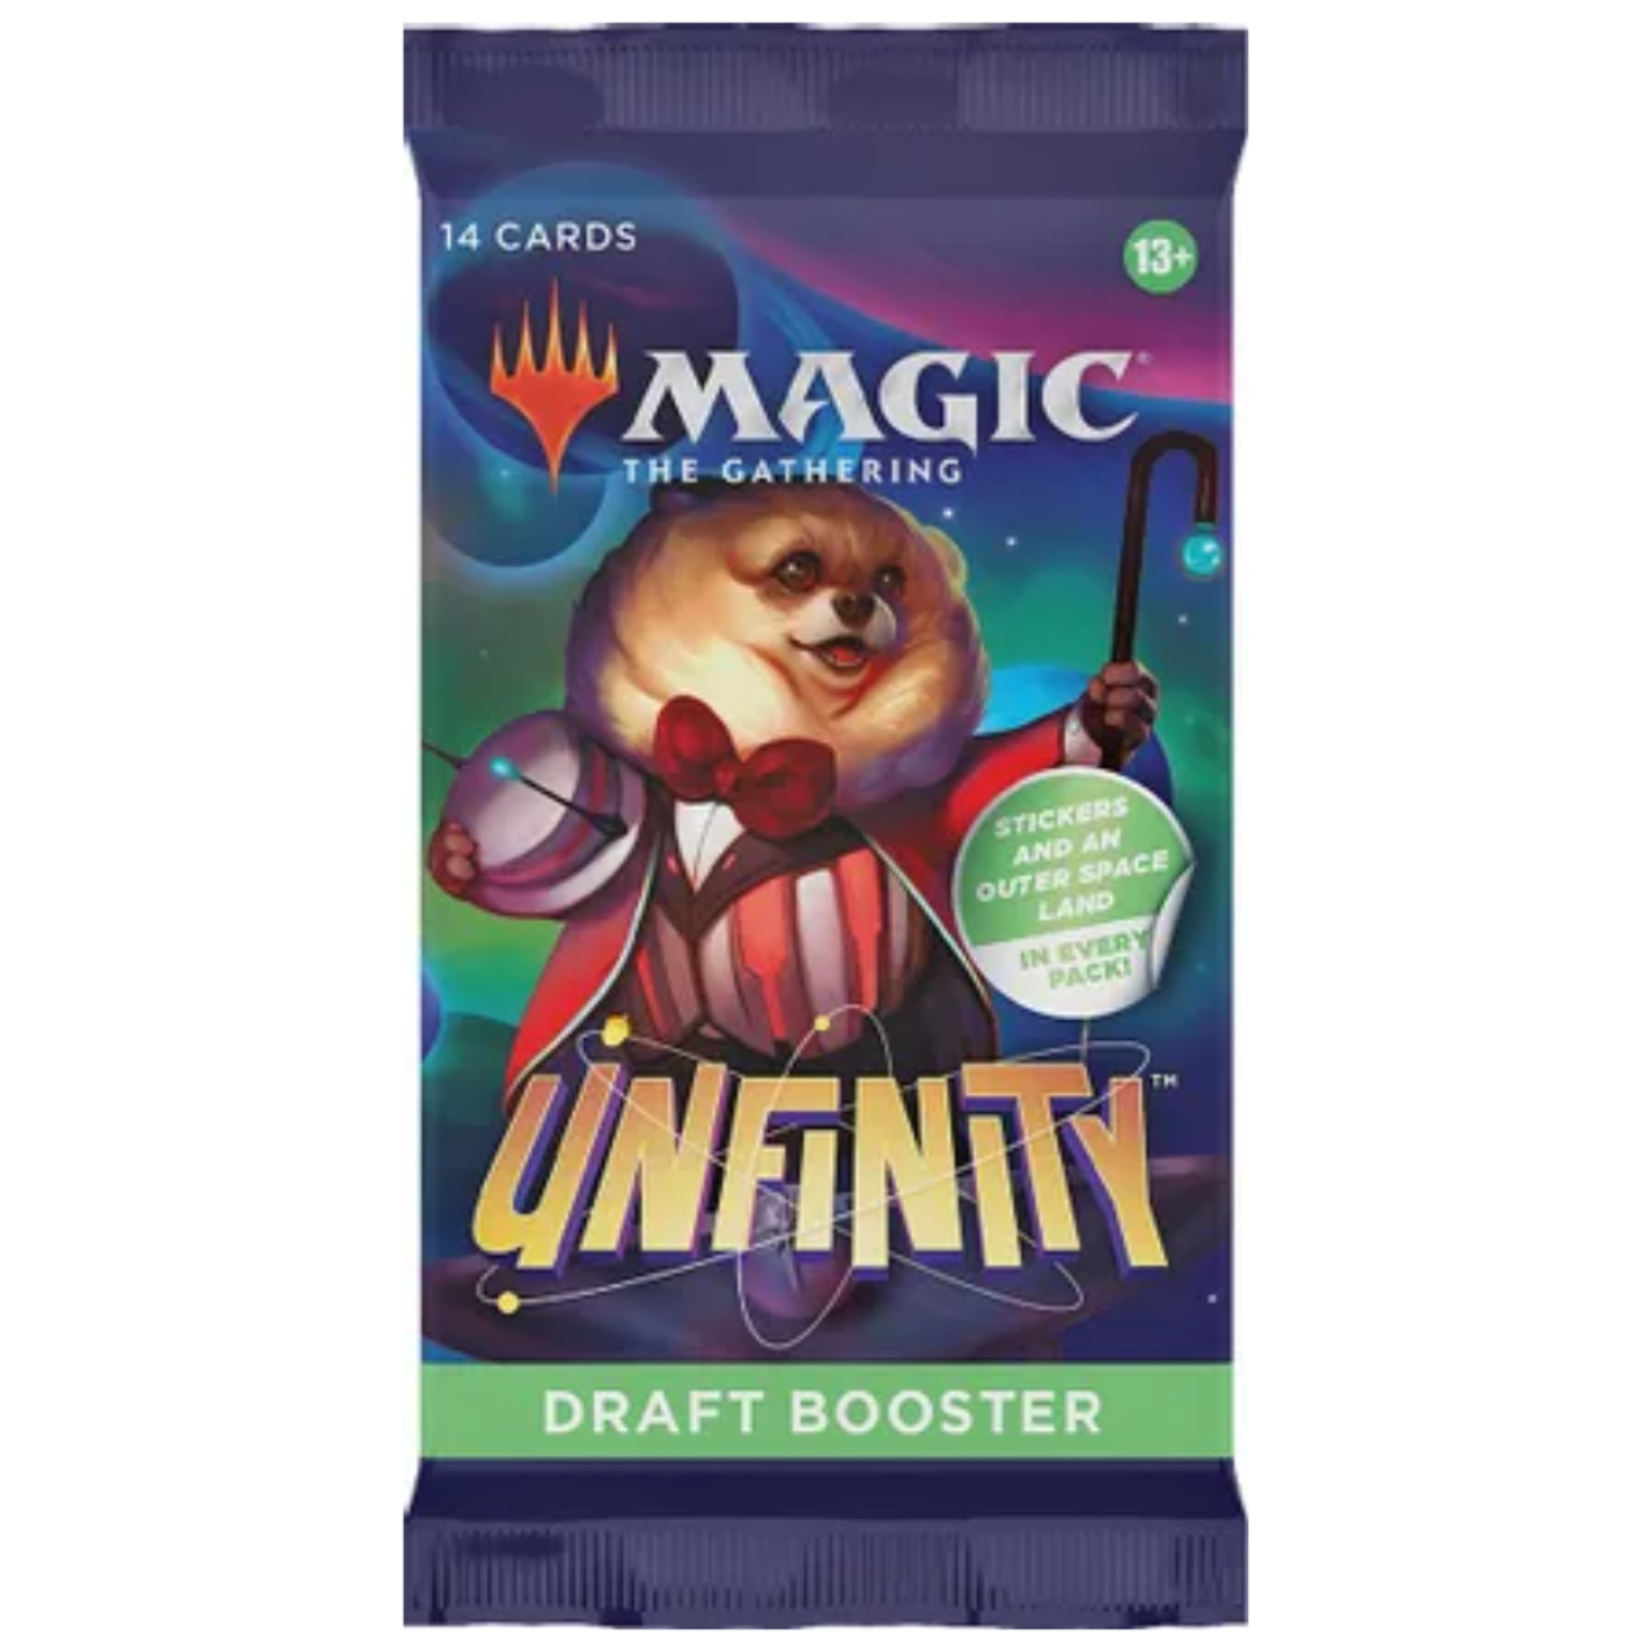 Wizards of the Coast Magic The Gathering: Unfinity Draft Booster Pack